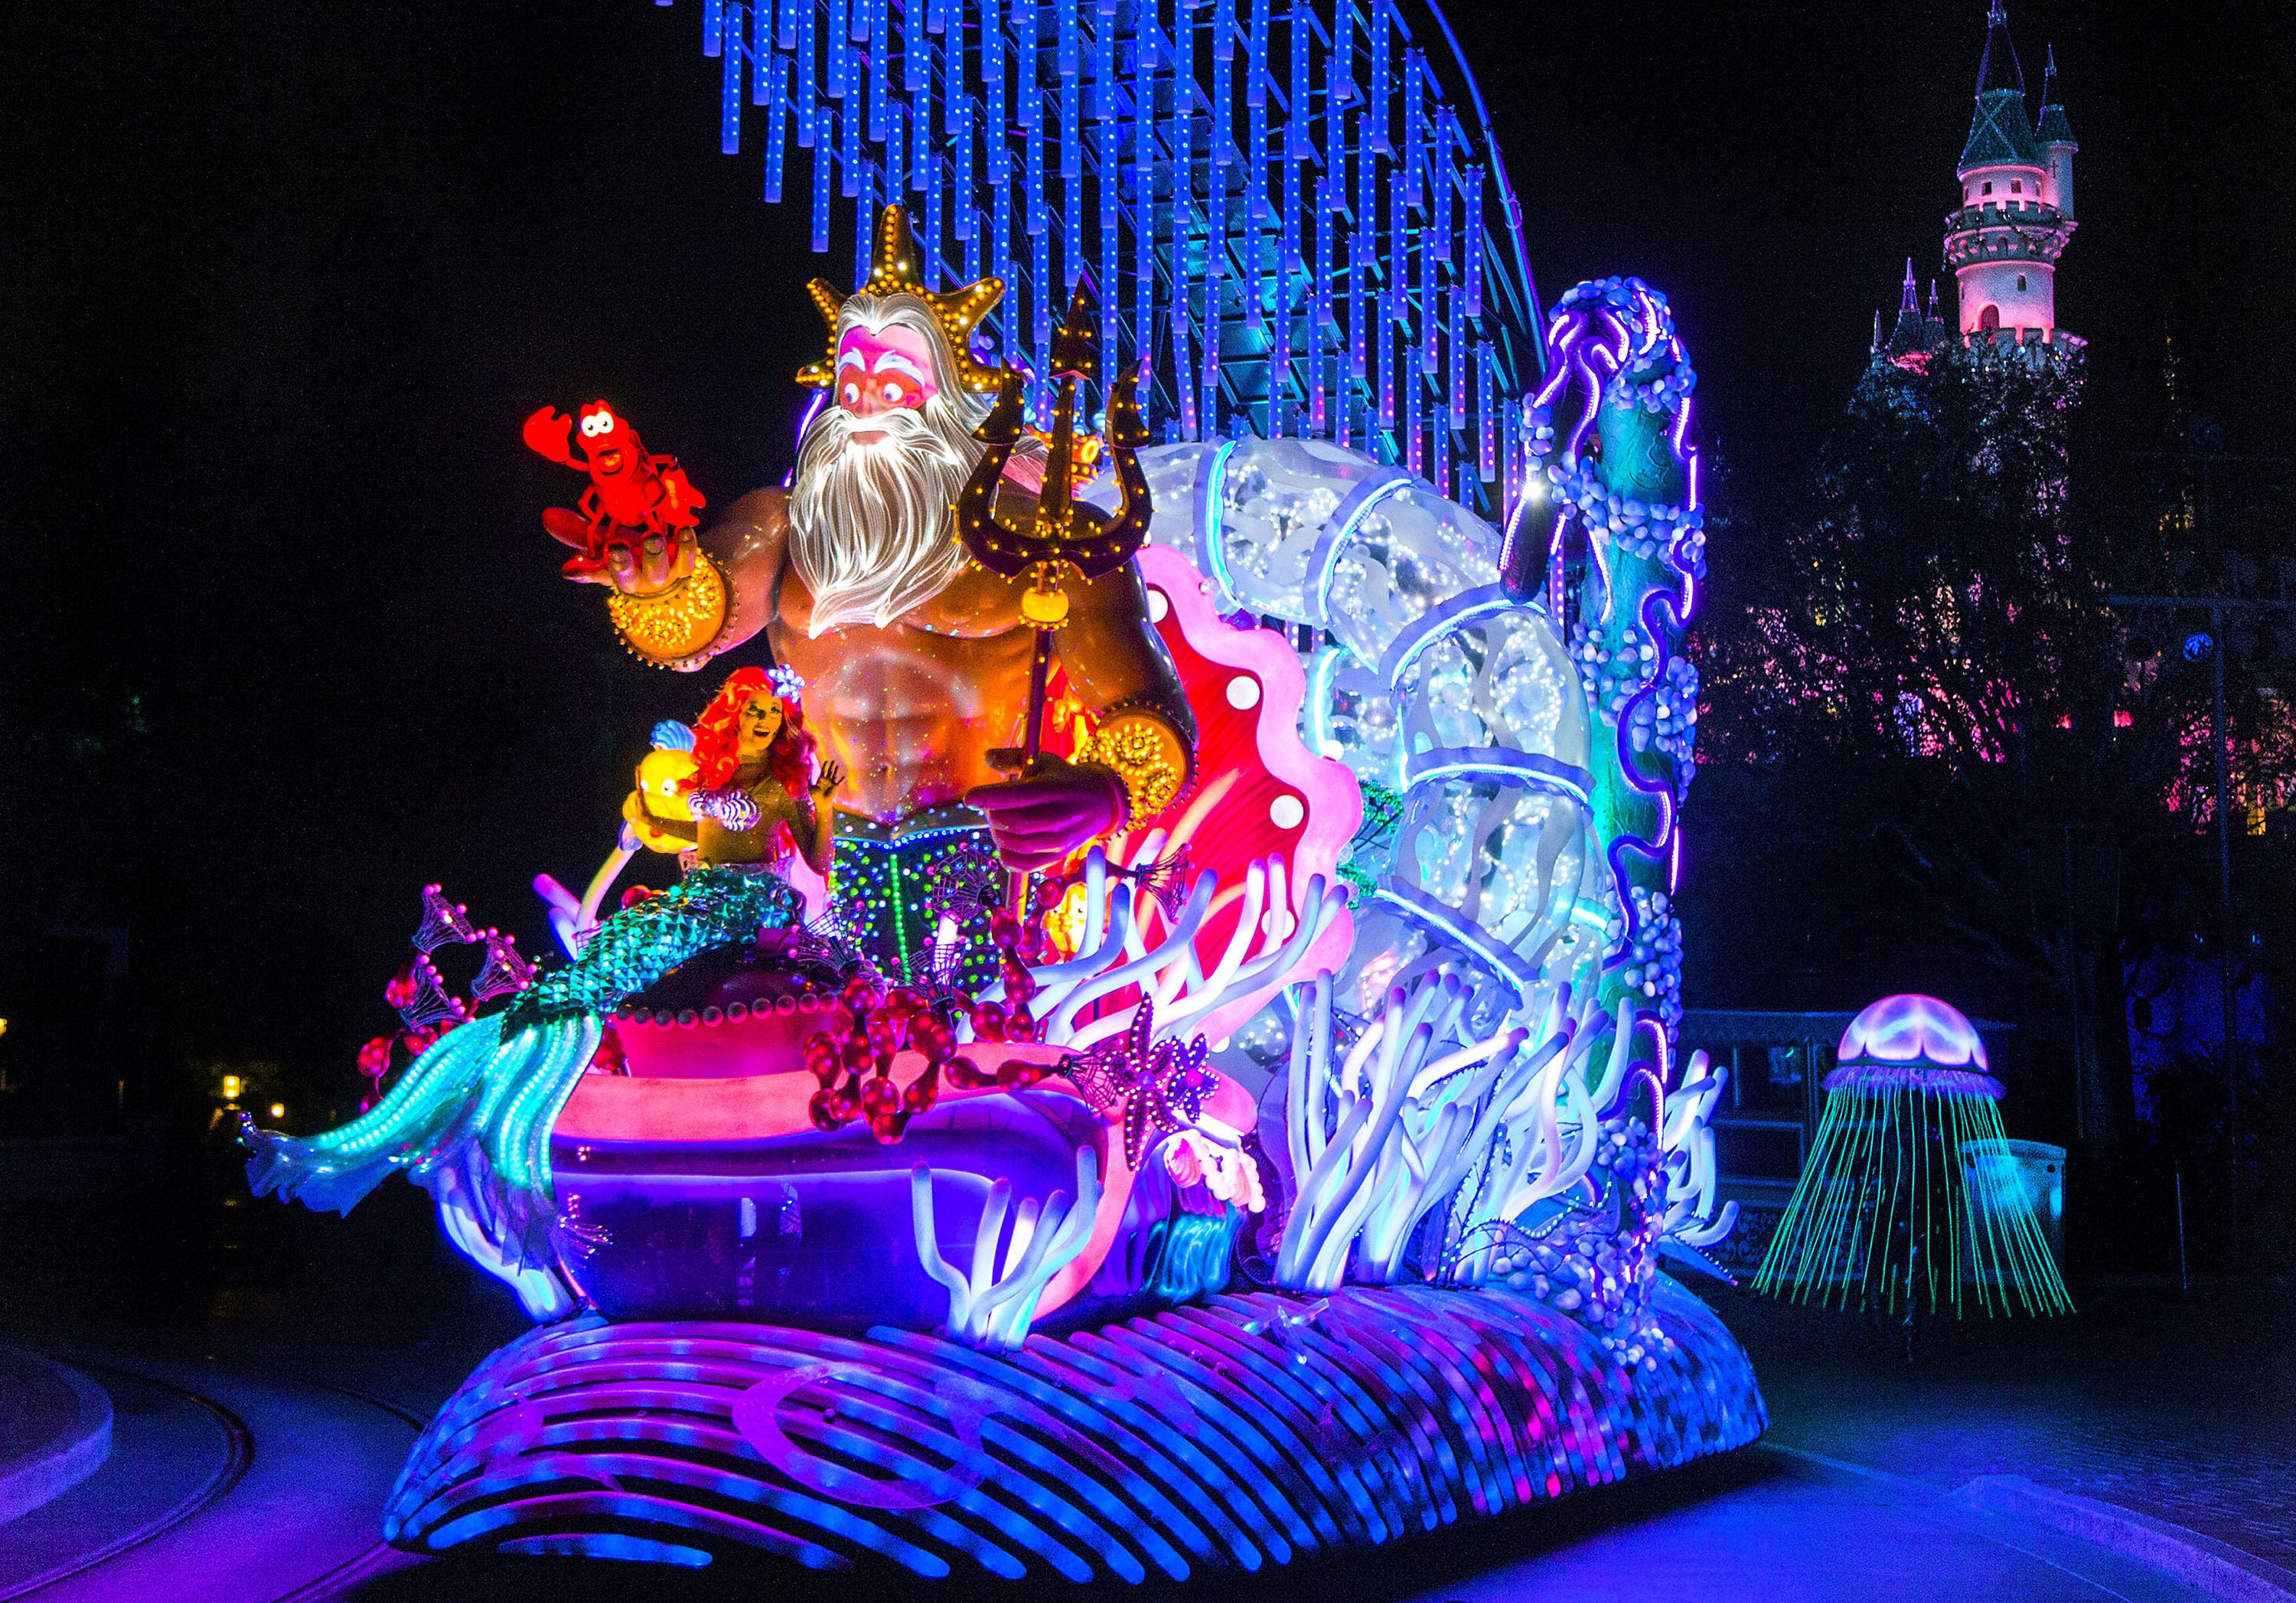 Exclusive Sneak Peek “Paint the Night” Parade and “Disneyland Forever